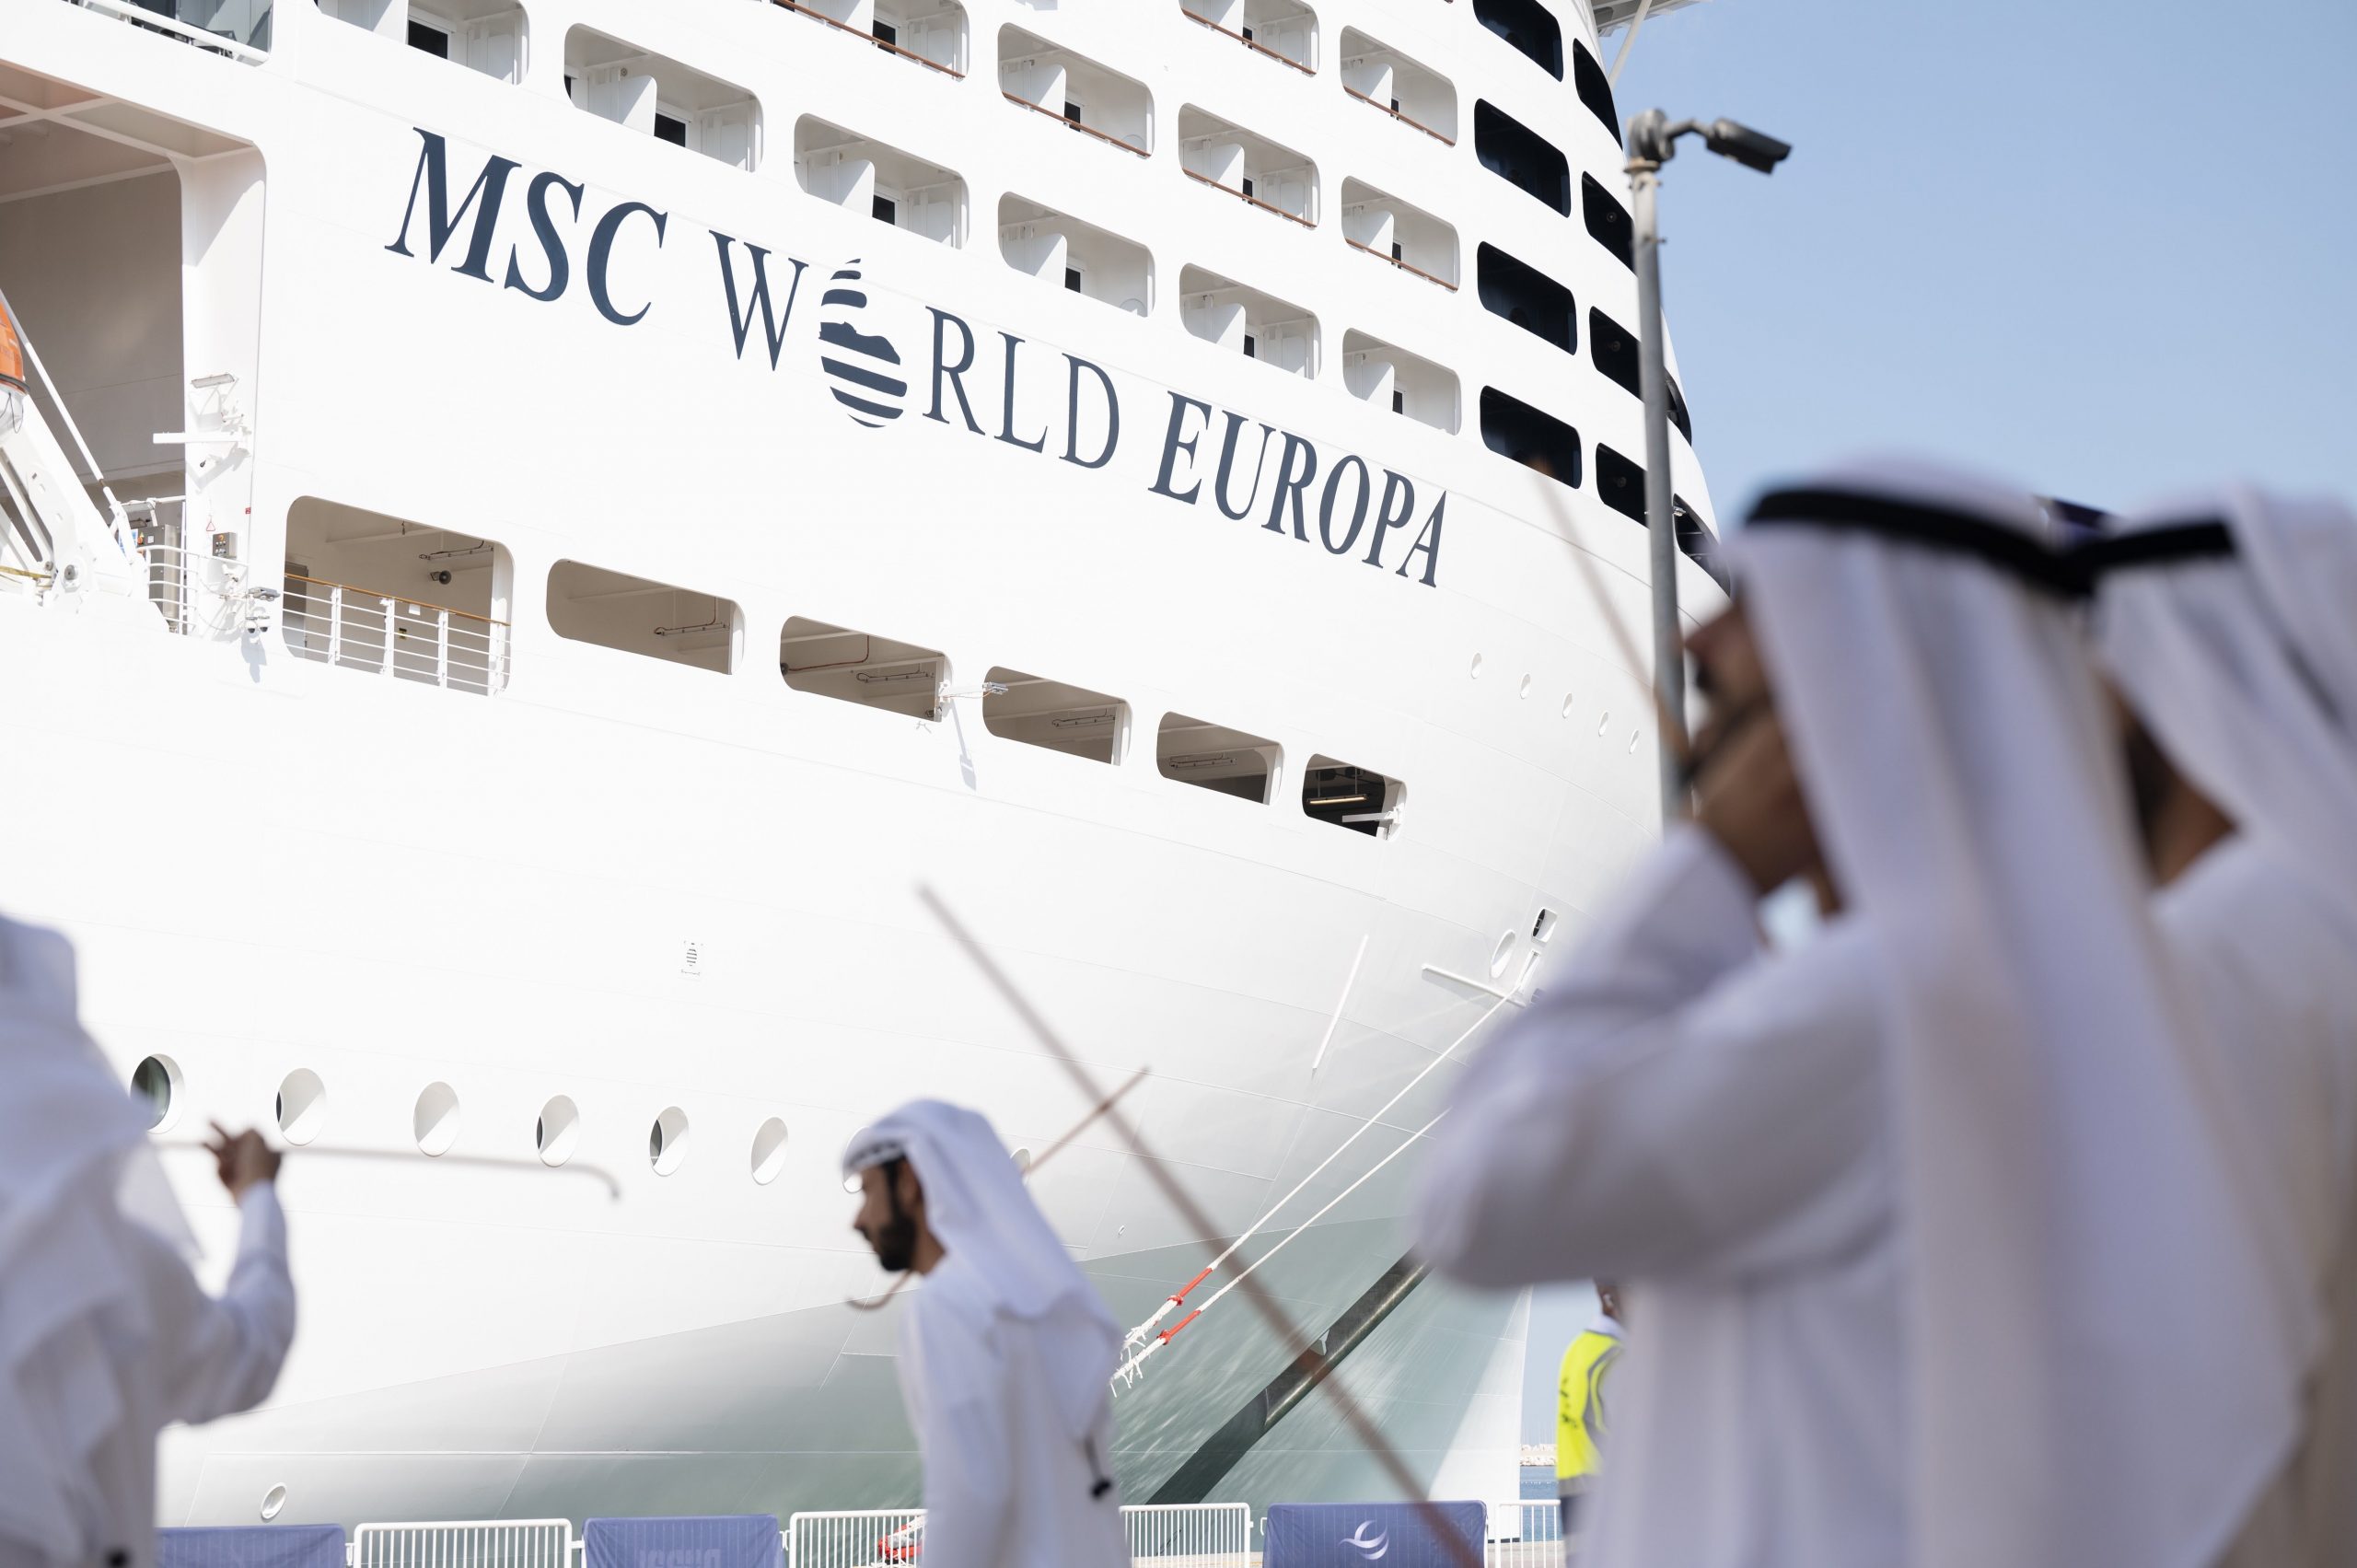 The MSC World Europa, a futuristic, lower-carbon-fuelled cruise ship made its first call at Mina Rashid on the 21st of December 2022.